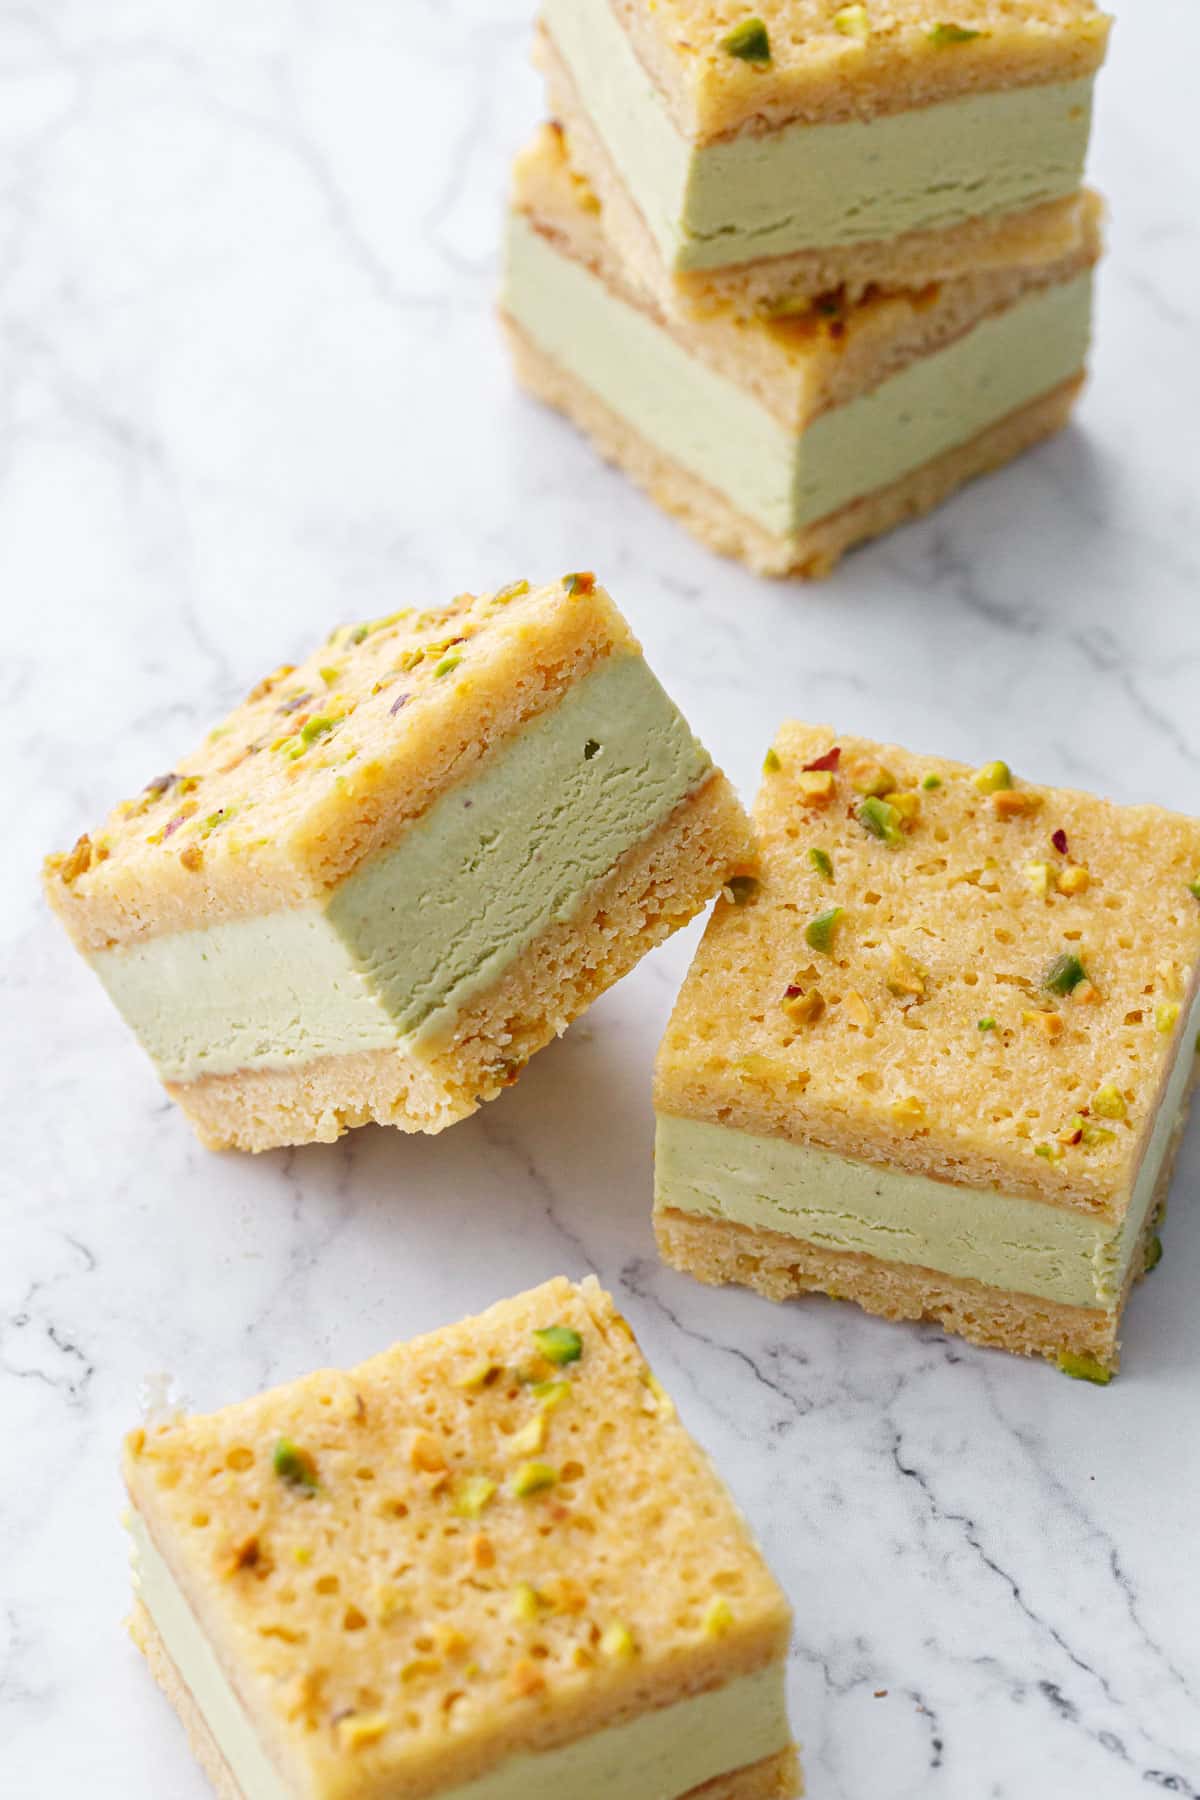 Perfectly cut squares of Pistachio Blondie Ice Cream Sandwiches on a marble background, showing the clear layers of blondie and creamy no-churn pistachio ice cream sandwiched in between.